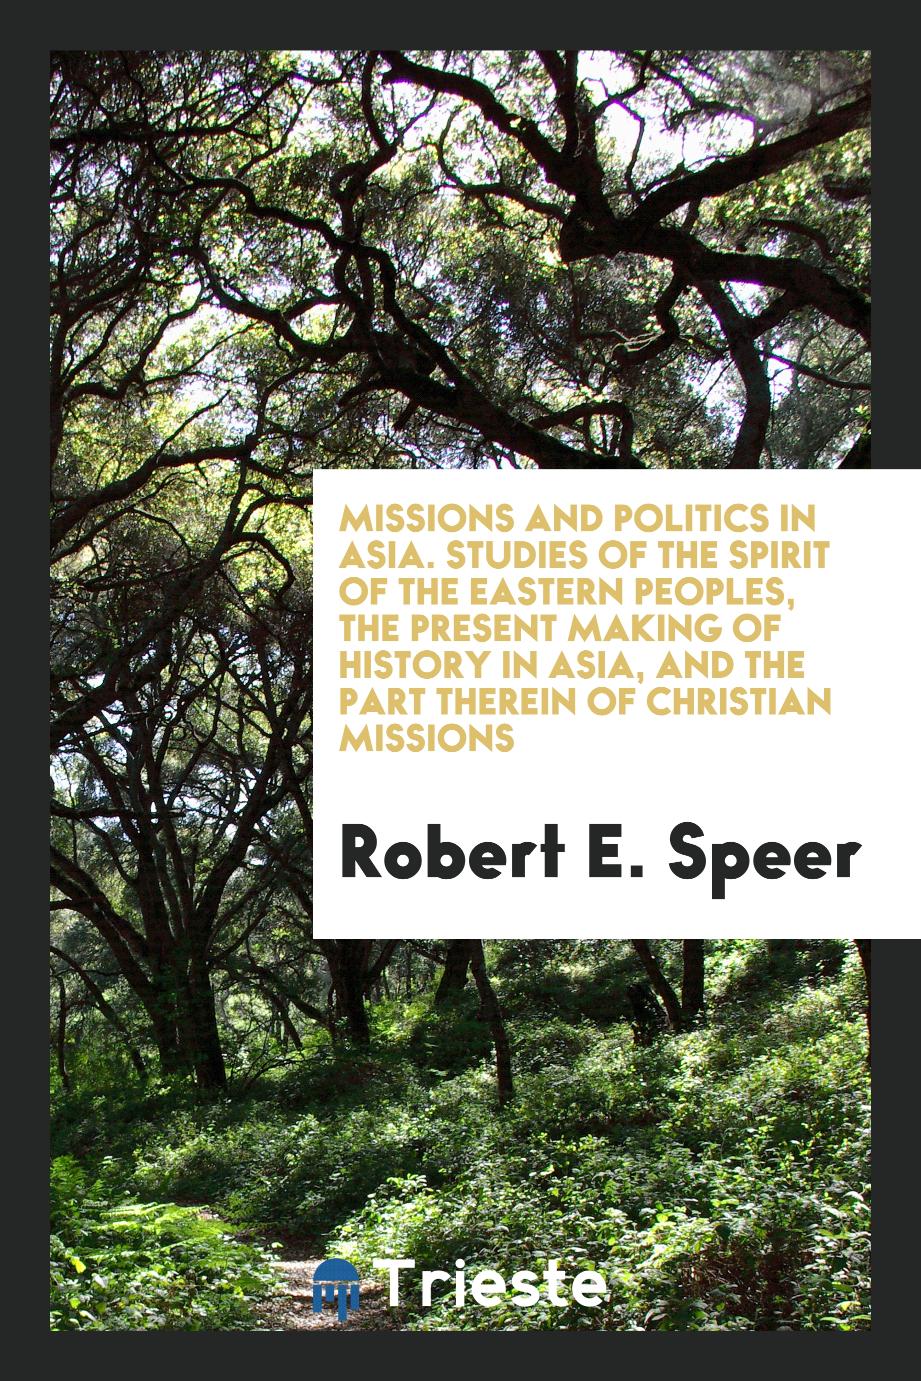 Missions and politics in Asia. Studies of the spirit of the eastern peoples, the present making of history in Asia, and the part therein of Christian missions